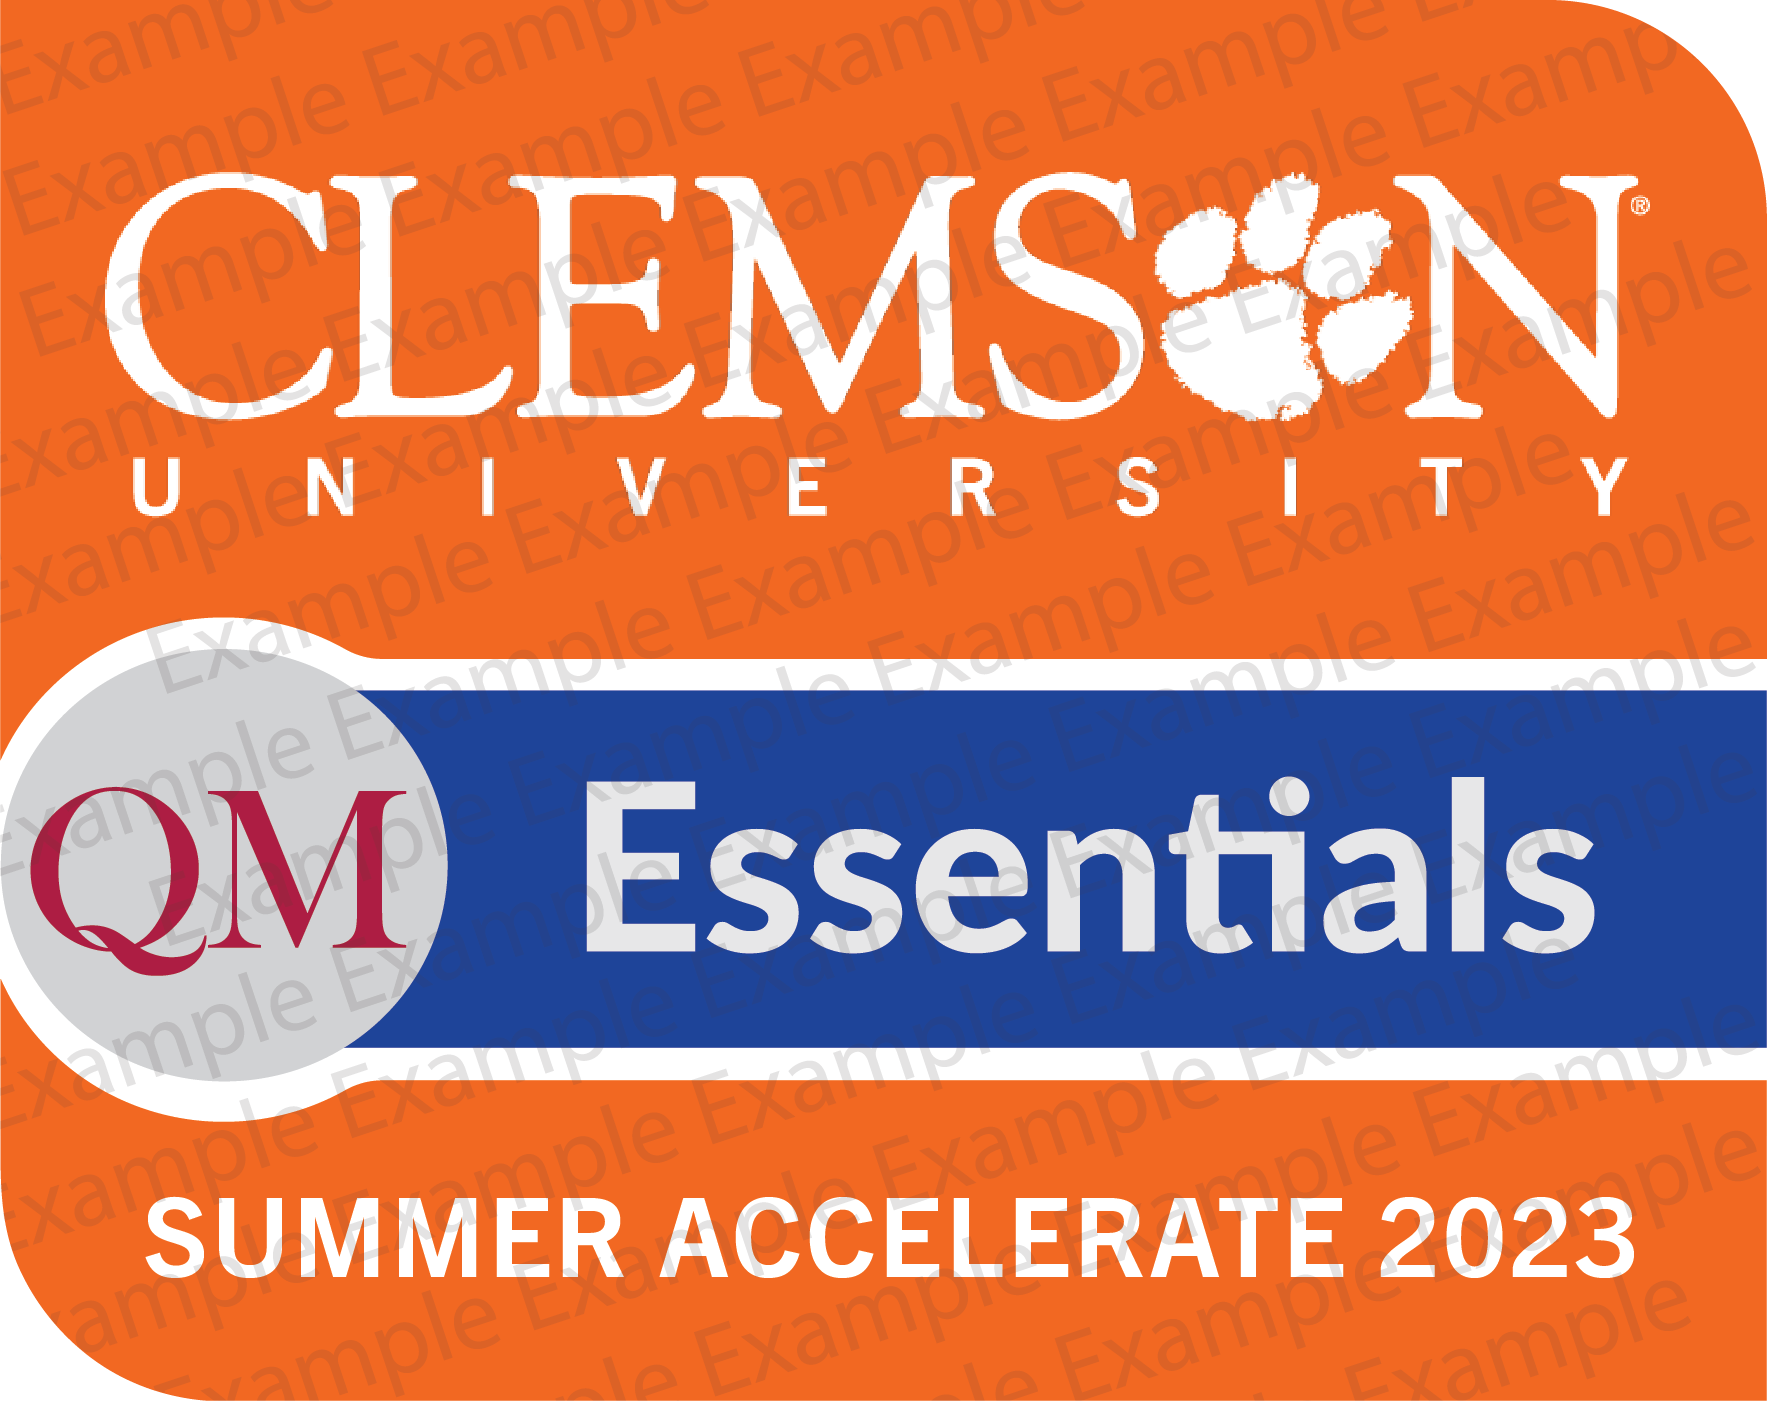 Orange square with rounded corners with text reading "Clemson University; QM Essentials; Summer Accelerate 2023."